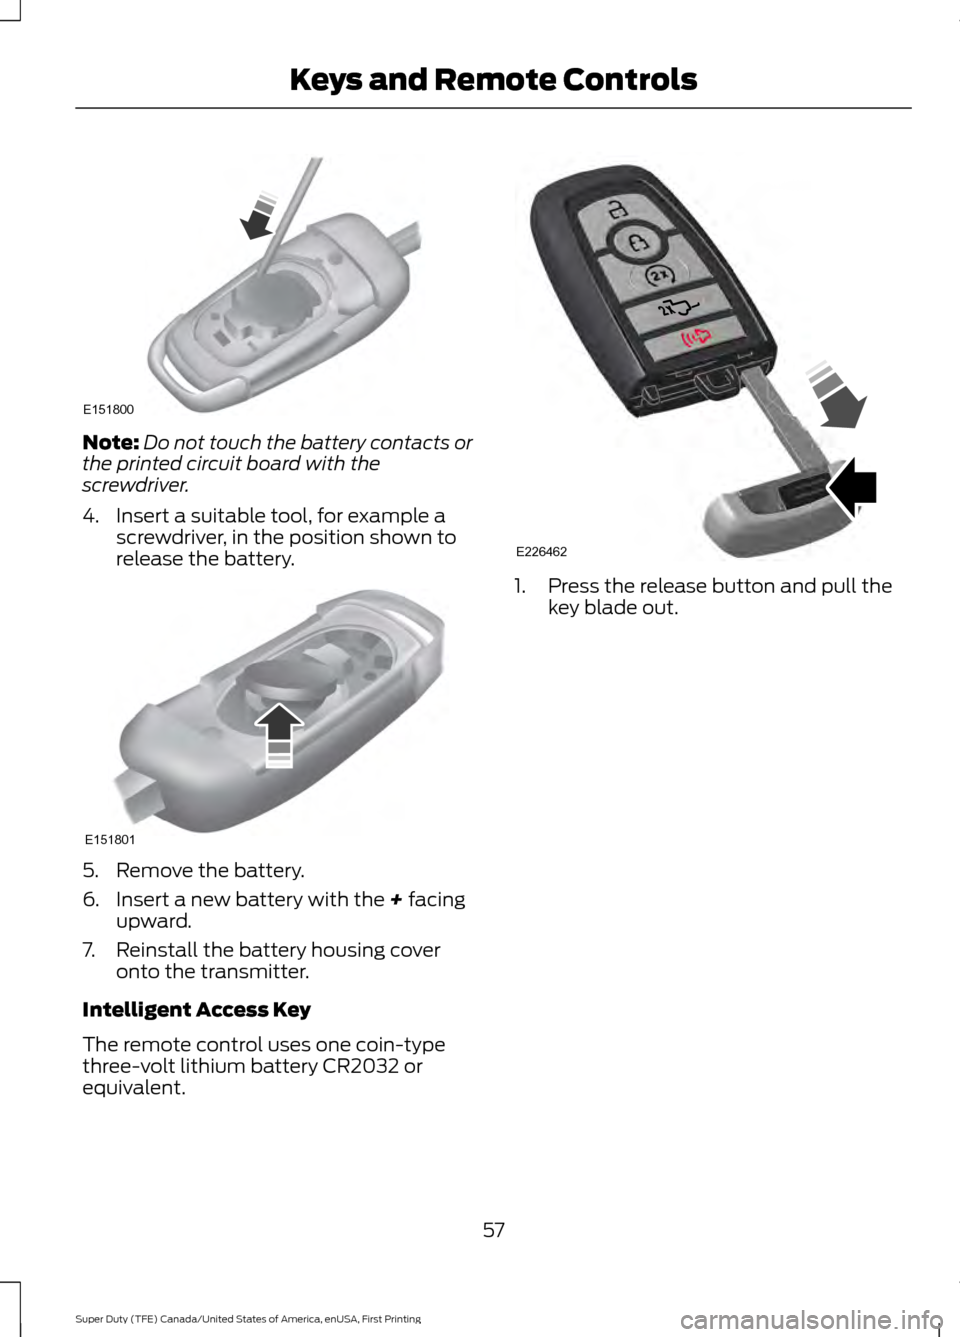 FORD SUPER DUTY 2017 4.G Owners Manual Note:
Do not touch the battery contacts or
the printed circuit board with the
screwdriver.
4. Insert a suitable tool, for example a screwdriver, in the position shown to
release the battery. 5. Remove